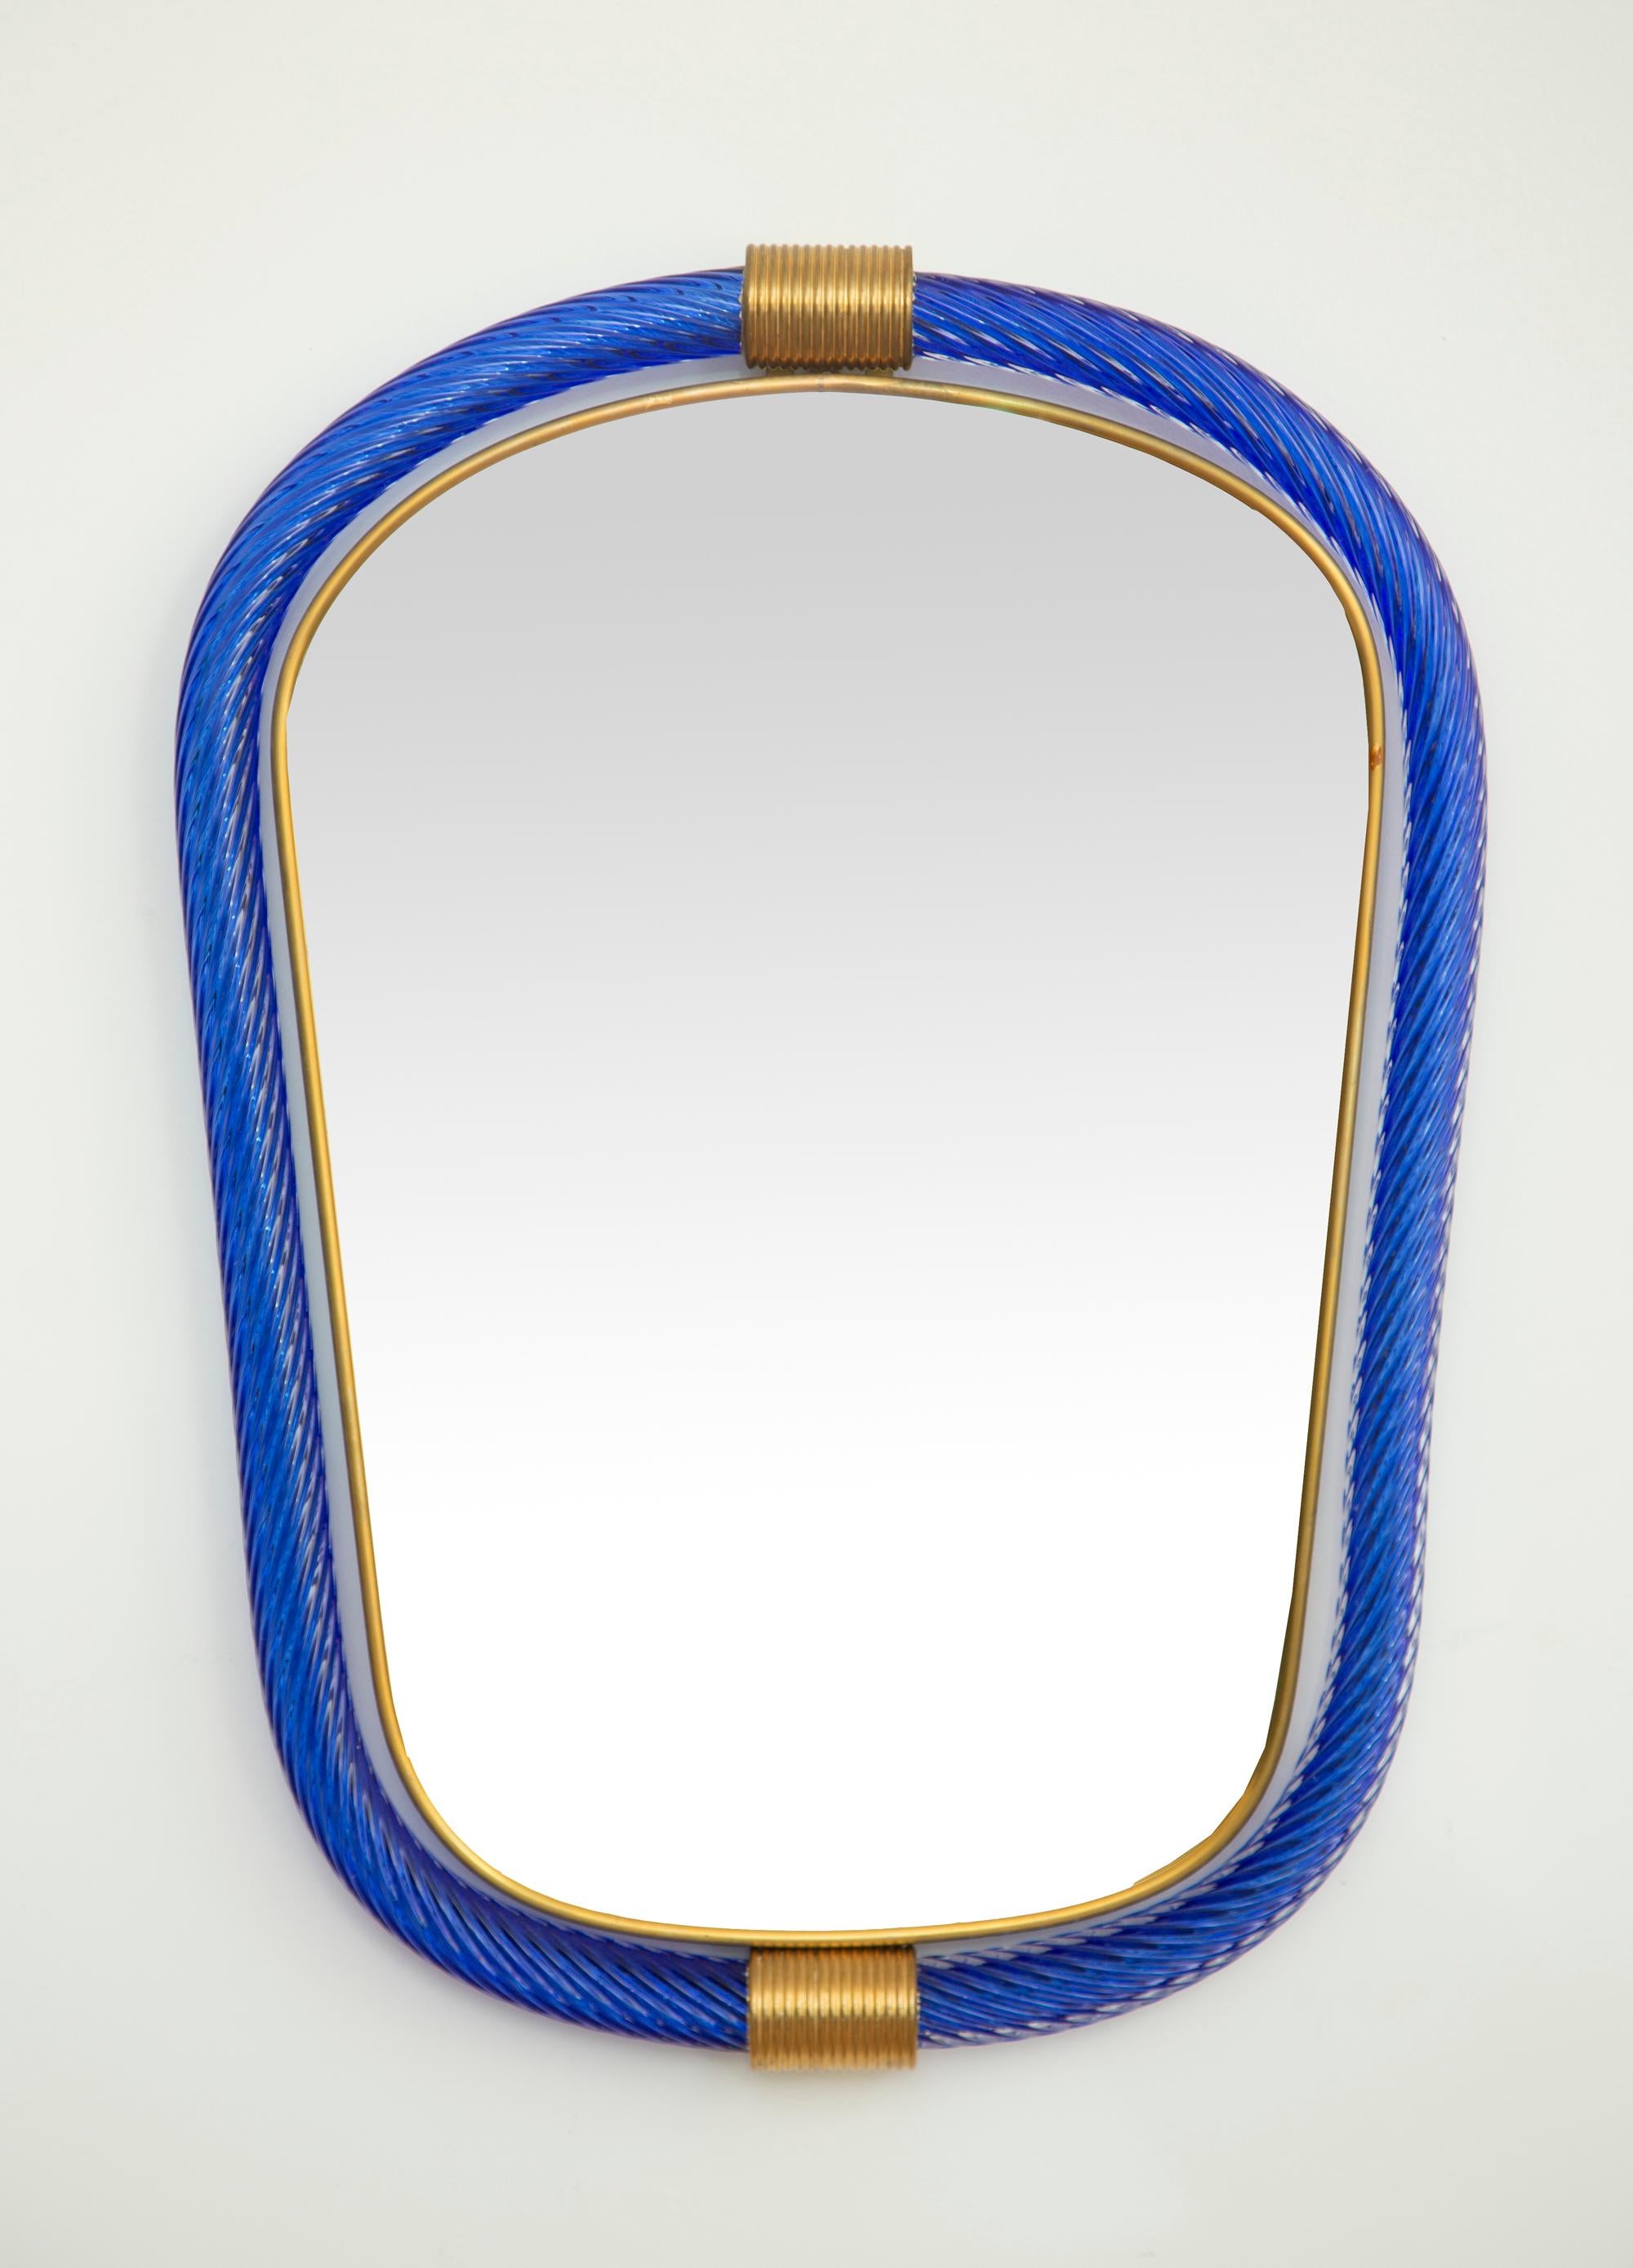 Cobalt blue twisted rope Murano glass mirror, in stock
Two brass accents and a thin inner brass gallery
11